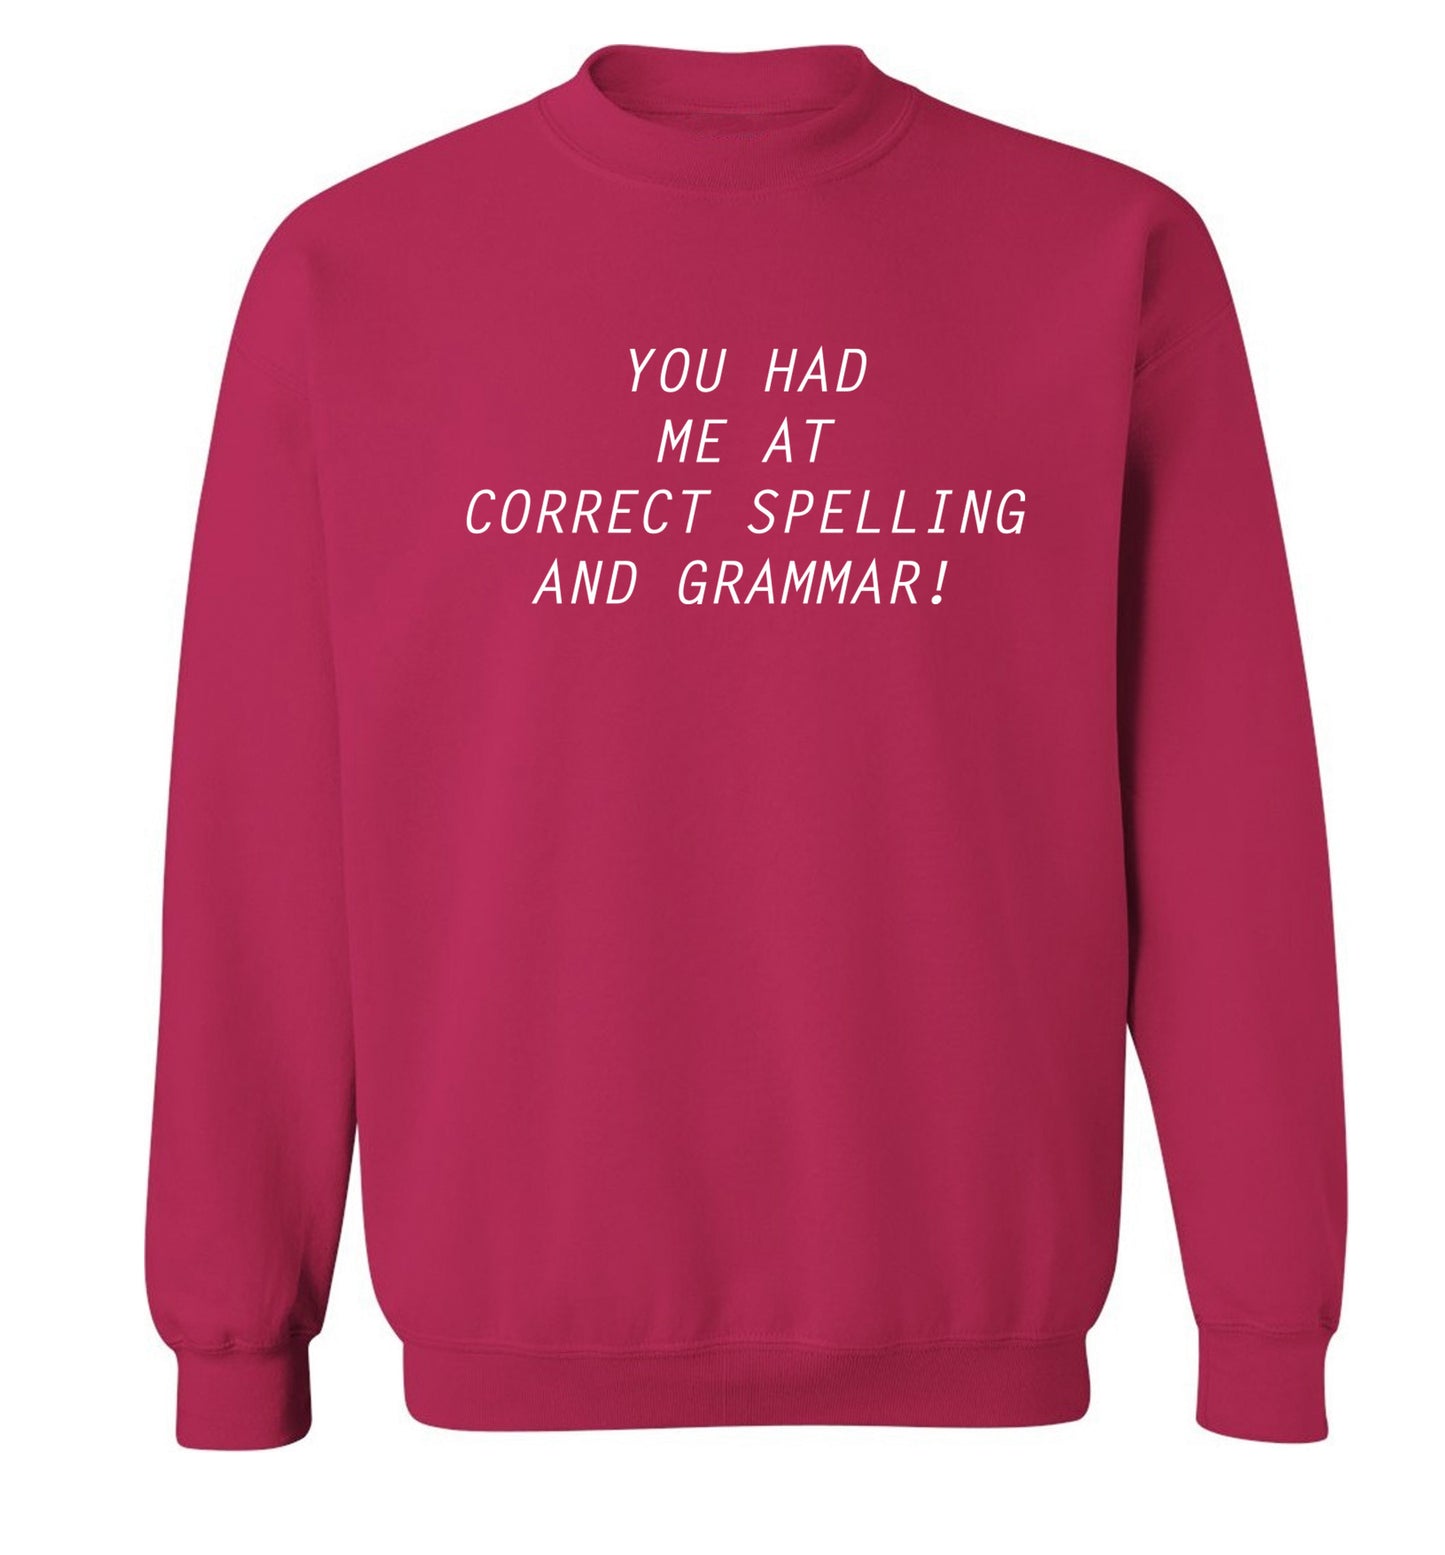 You had me at correct spelling and grammar Adult's unisex pink Sweater 2XL